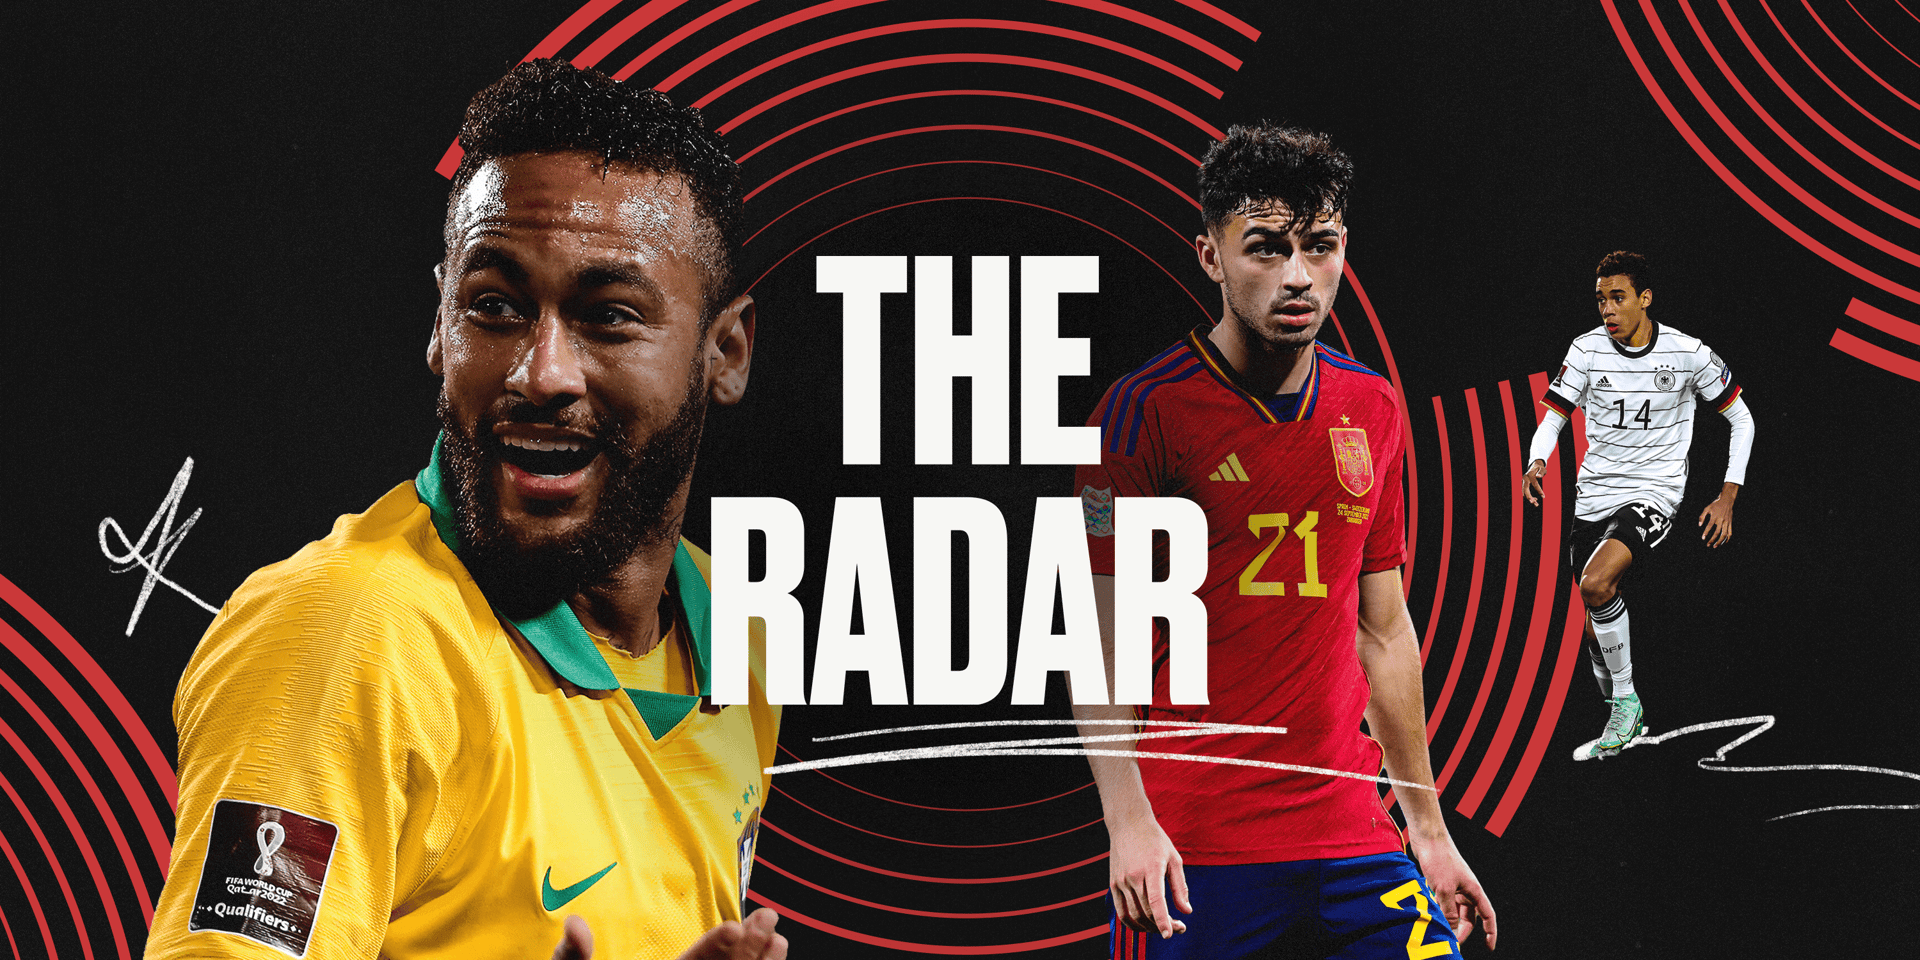 How to understand The Radar, The Athletic's World Cup player guide